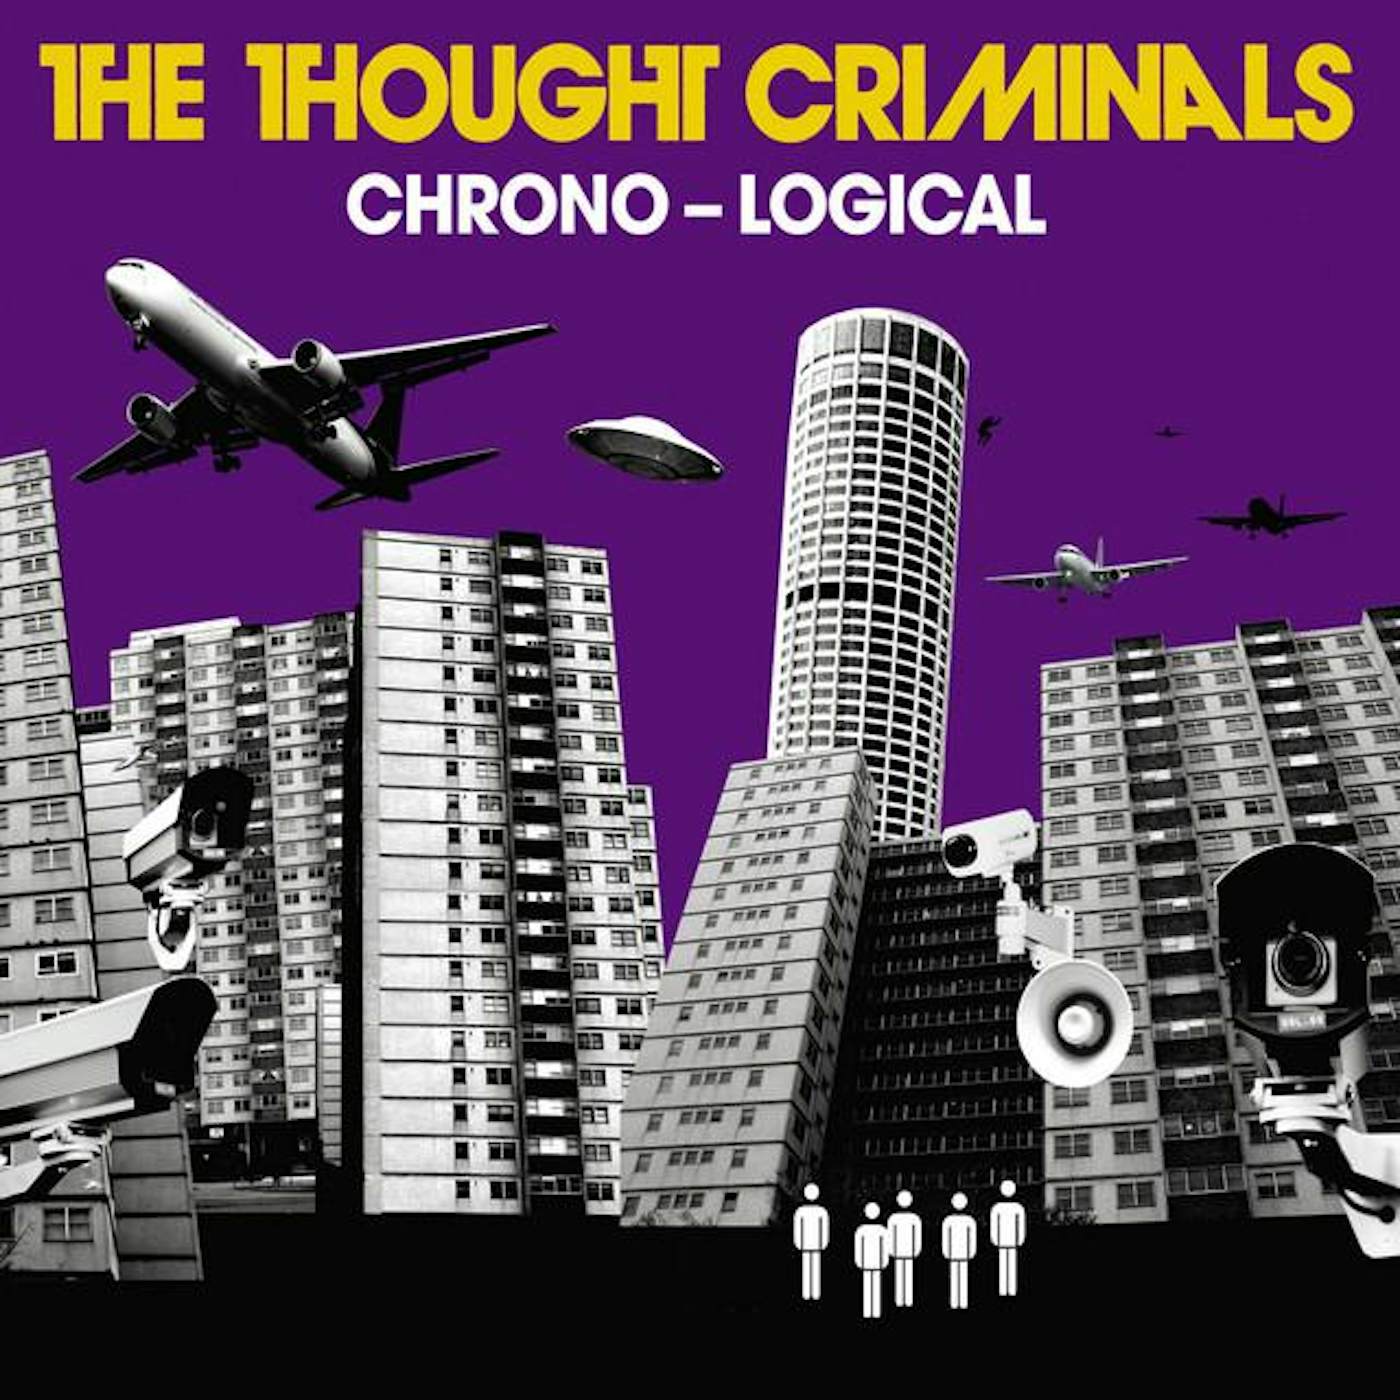 The Thought Criminals